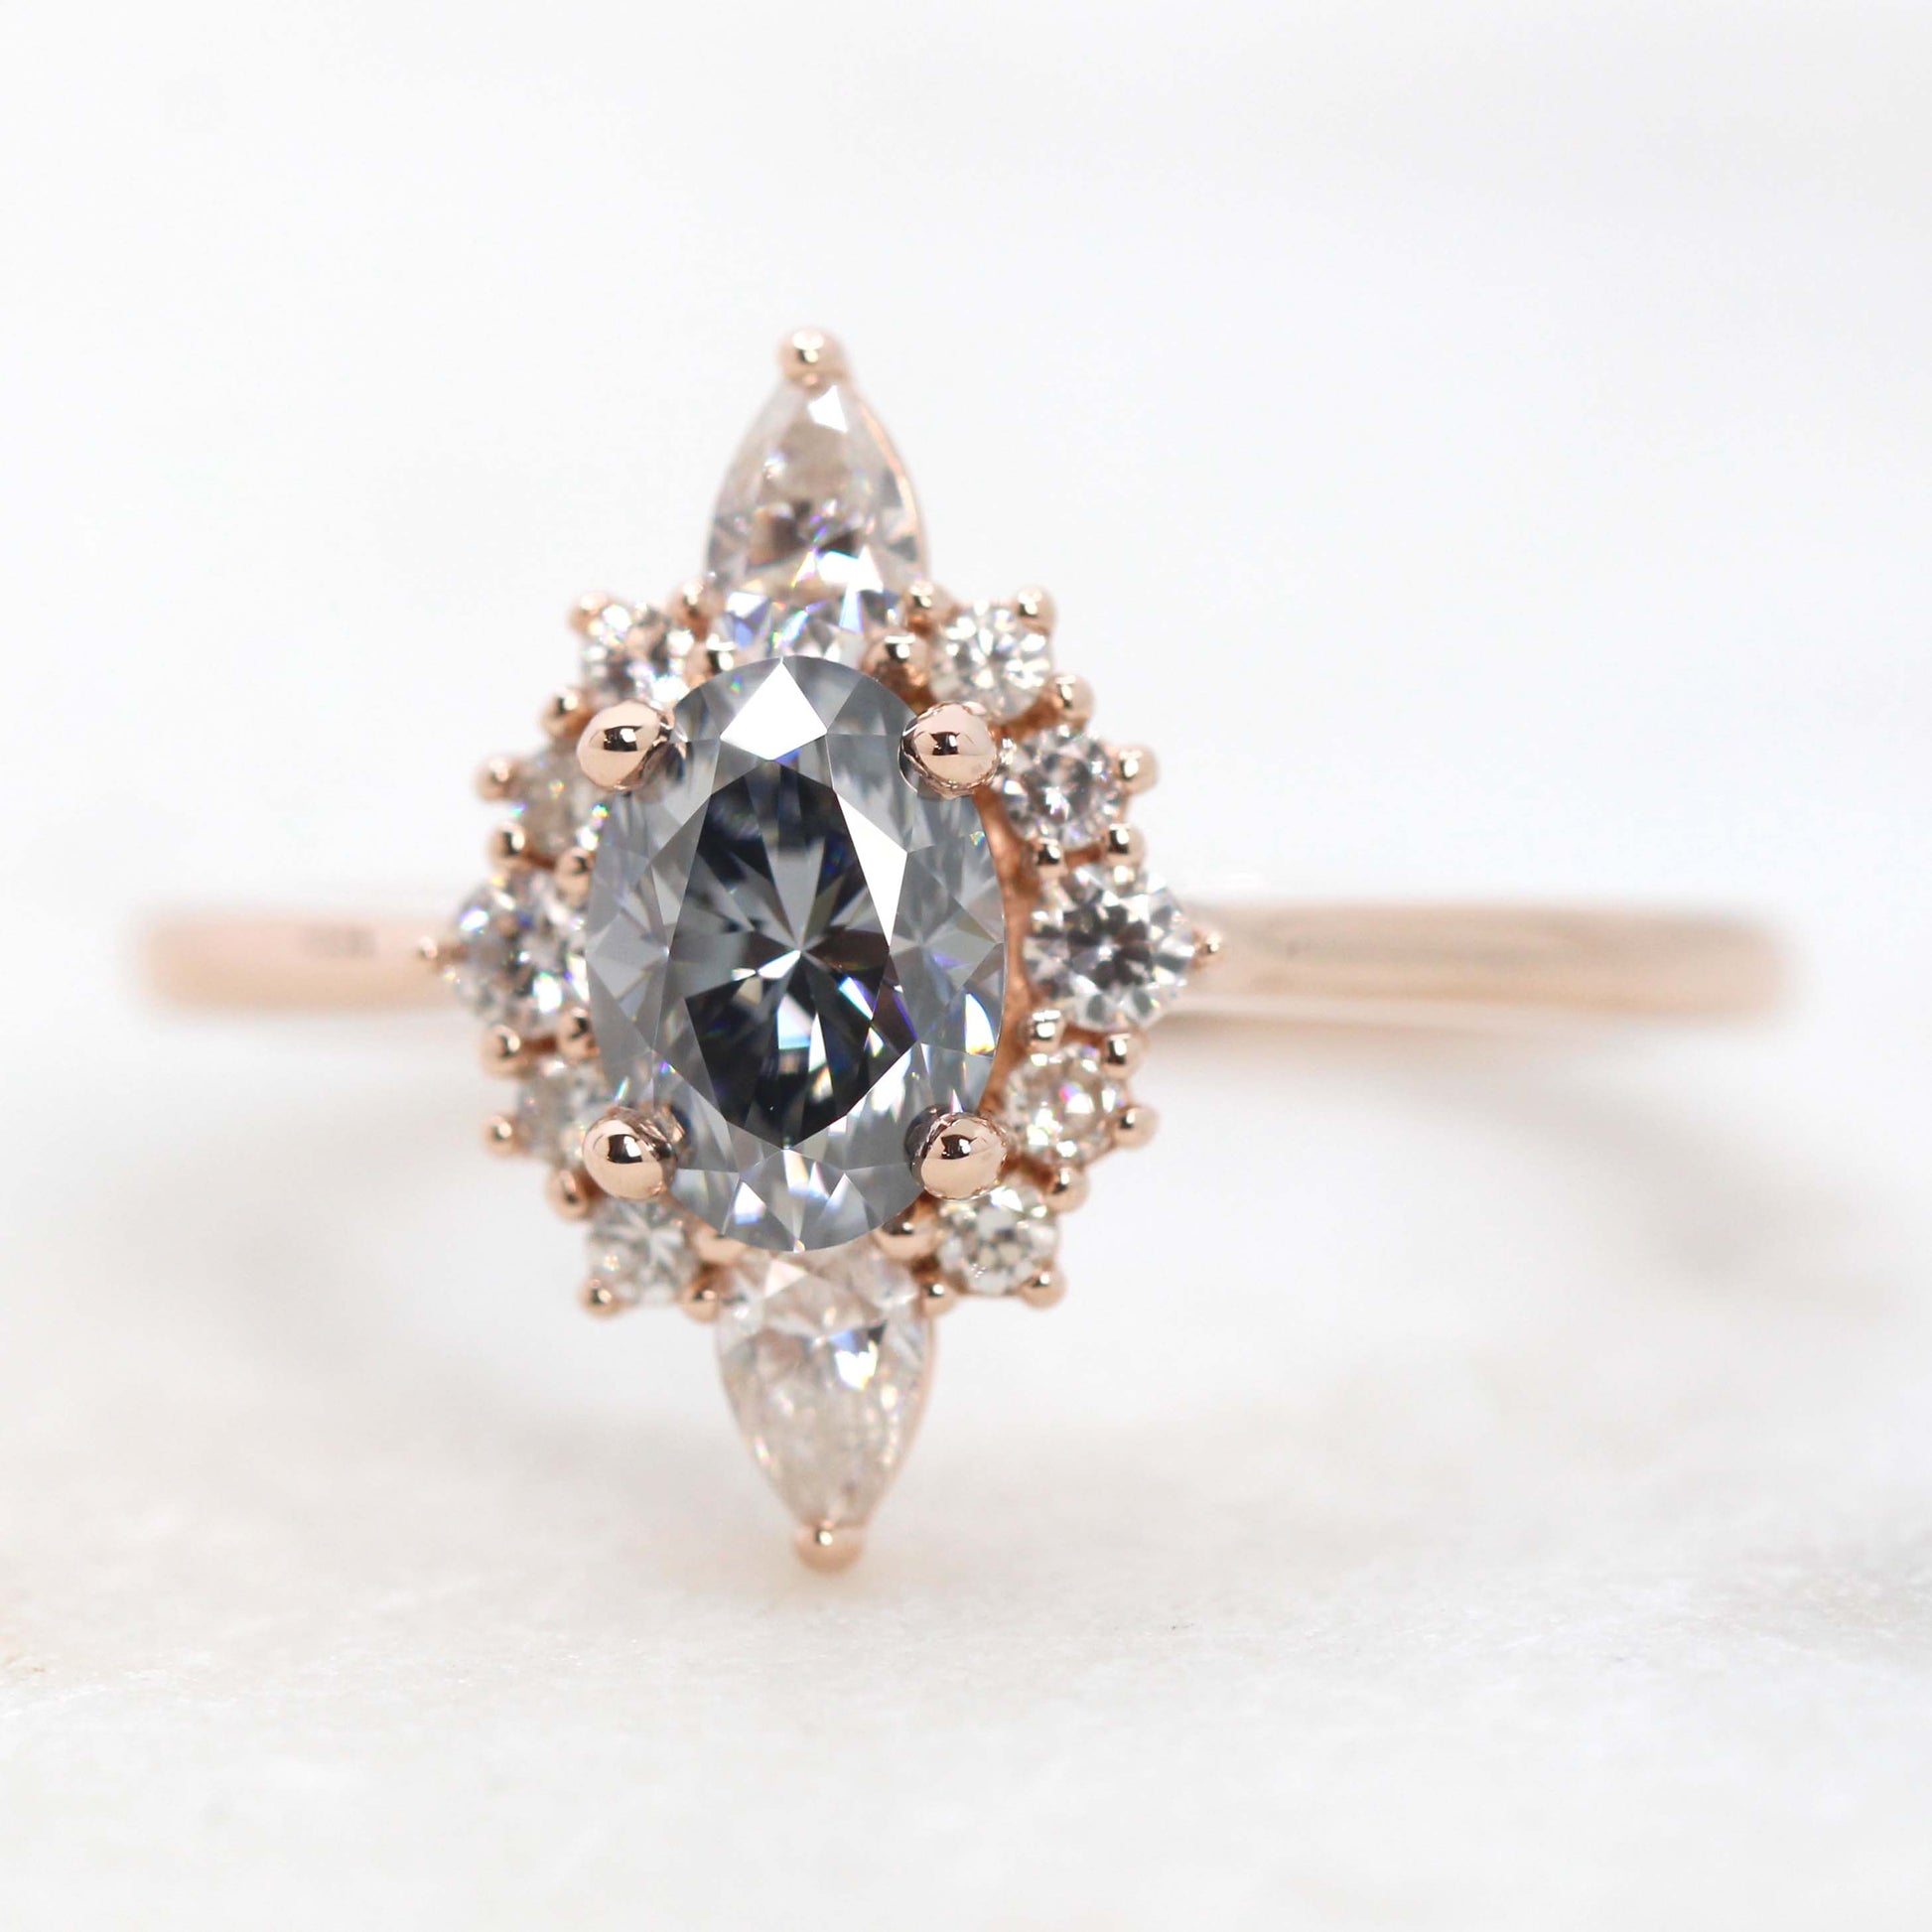 Noelle Ring with a 0.80 Carat Gray Oval Moissanite and Moissanite Accents - Made to Order, Choose Your Gold Tone - Midwinter Co. Alternative Bridal Rings and Modern Fine Jewelry